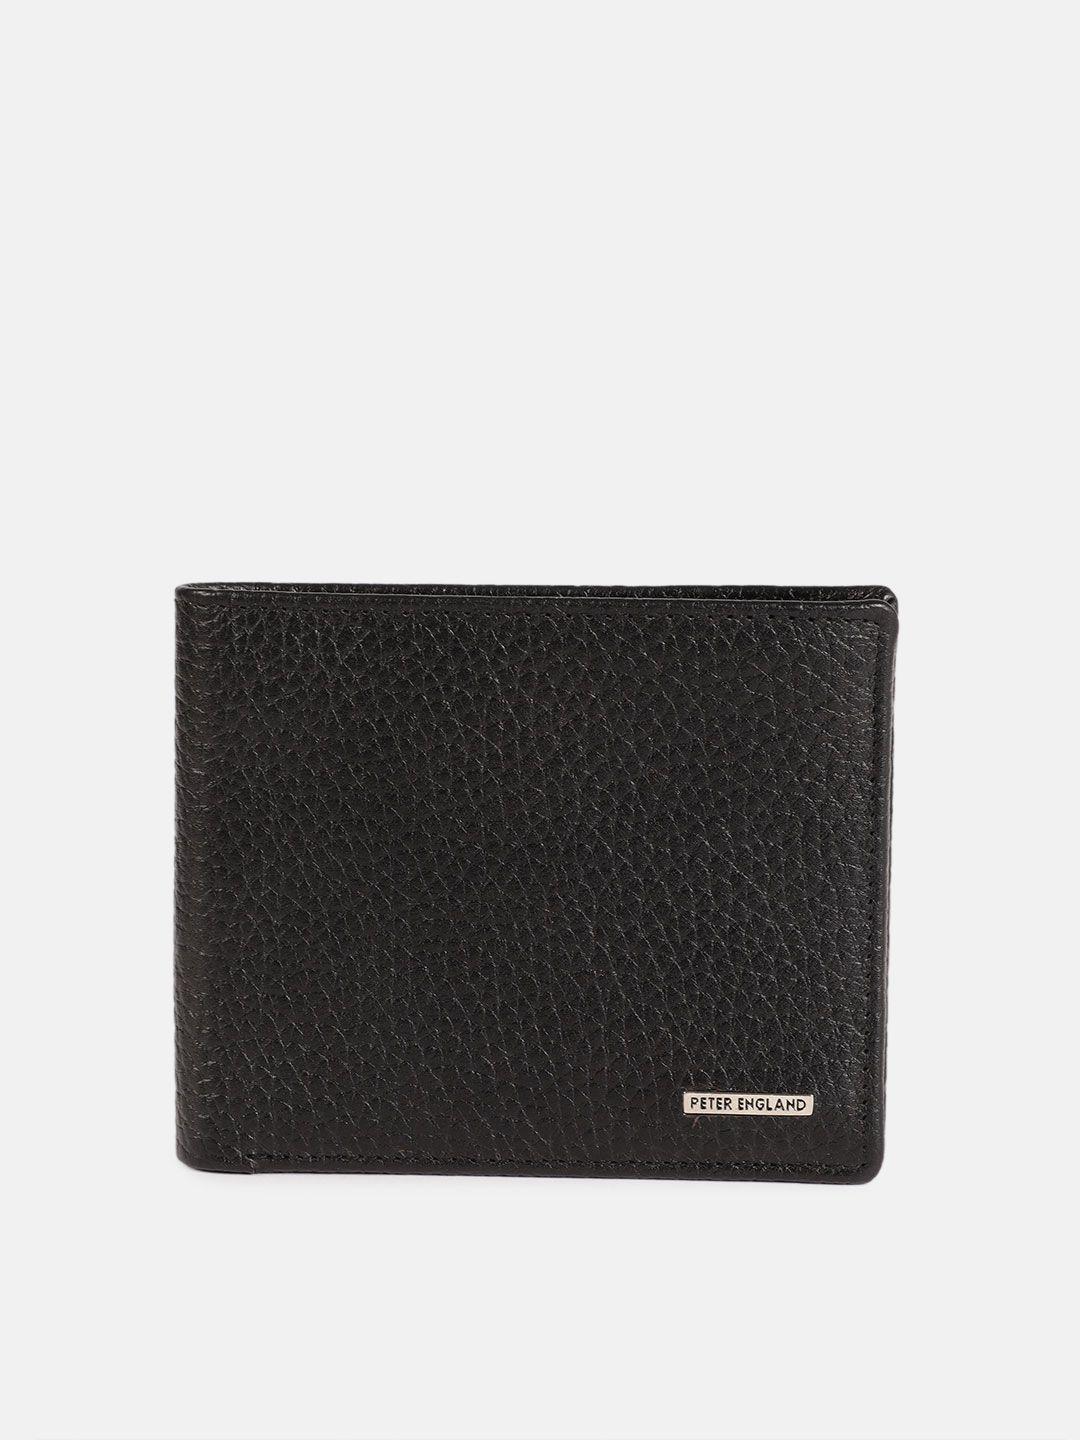 peter-england-men-black-textured-two-fold-leather-wallet